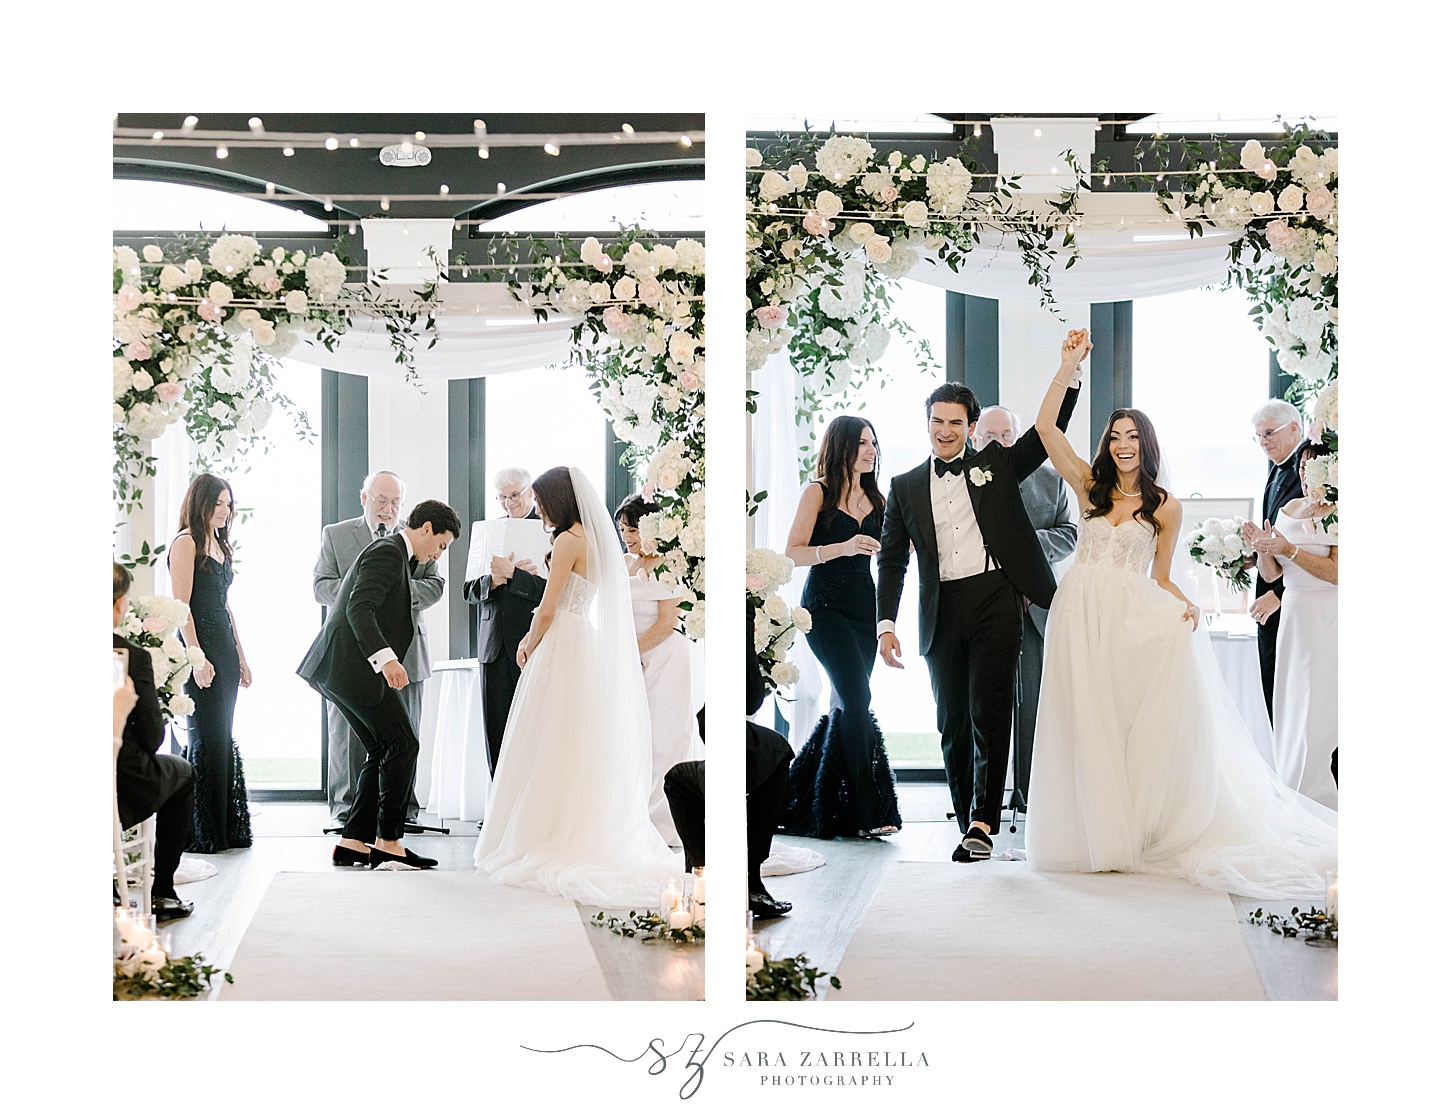 groom breaks glass and cheers with bride under chuppah